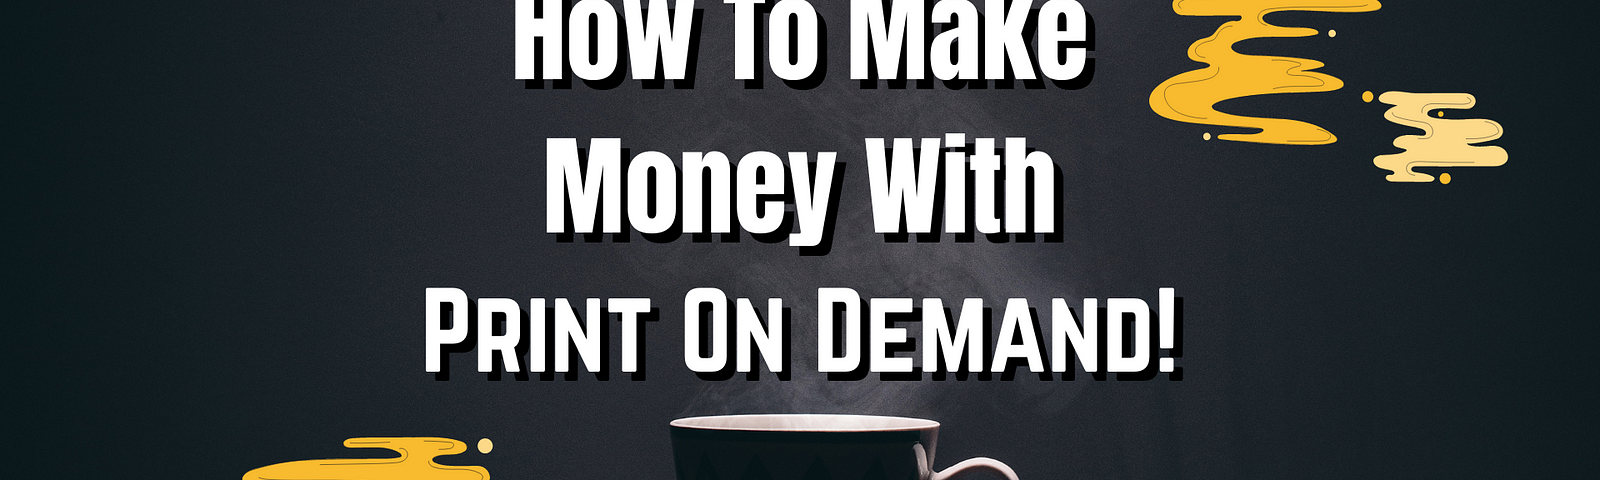 how to make money online with print on demand